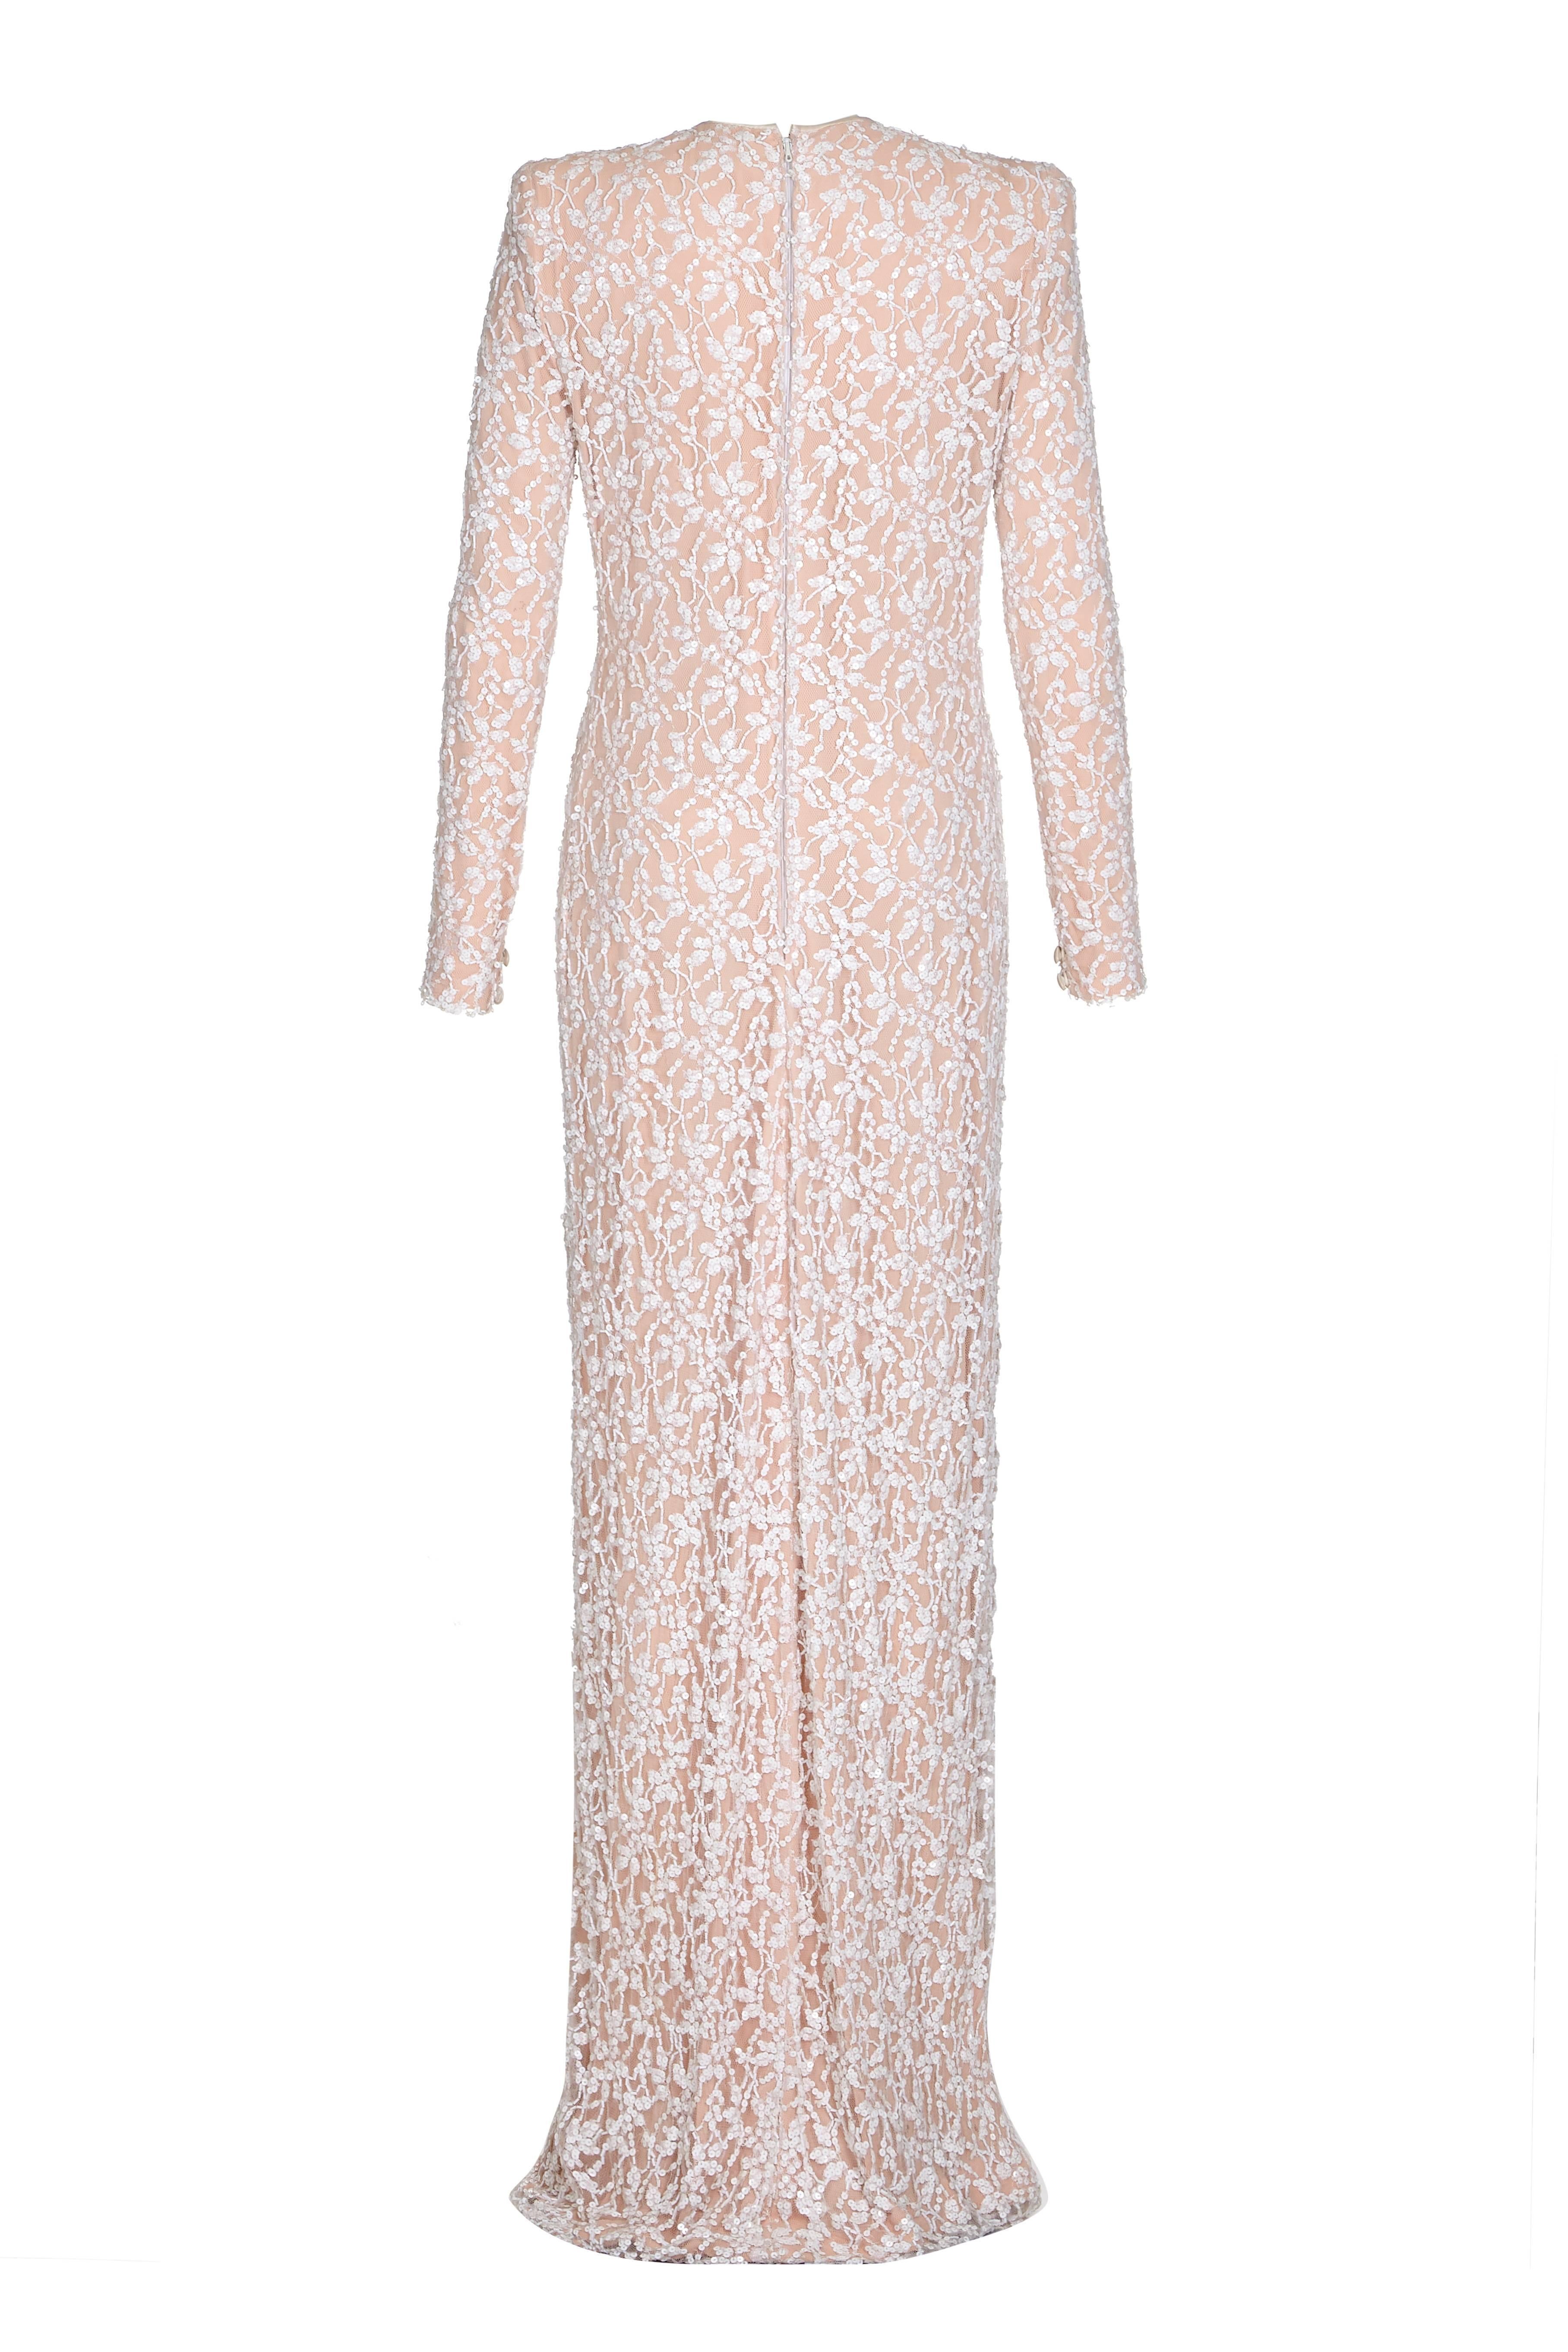 Late 1970s Andre Laug couture labelled peachy pink & white sequinned net gown.  Impeccably made by hand, the underlay is a heavy-weight silk crepe overlaid with a fully sequinned and beaded white net.  Although offering full coverage, the design is